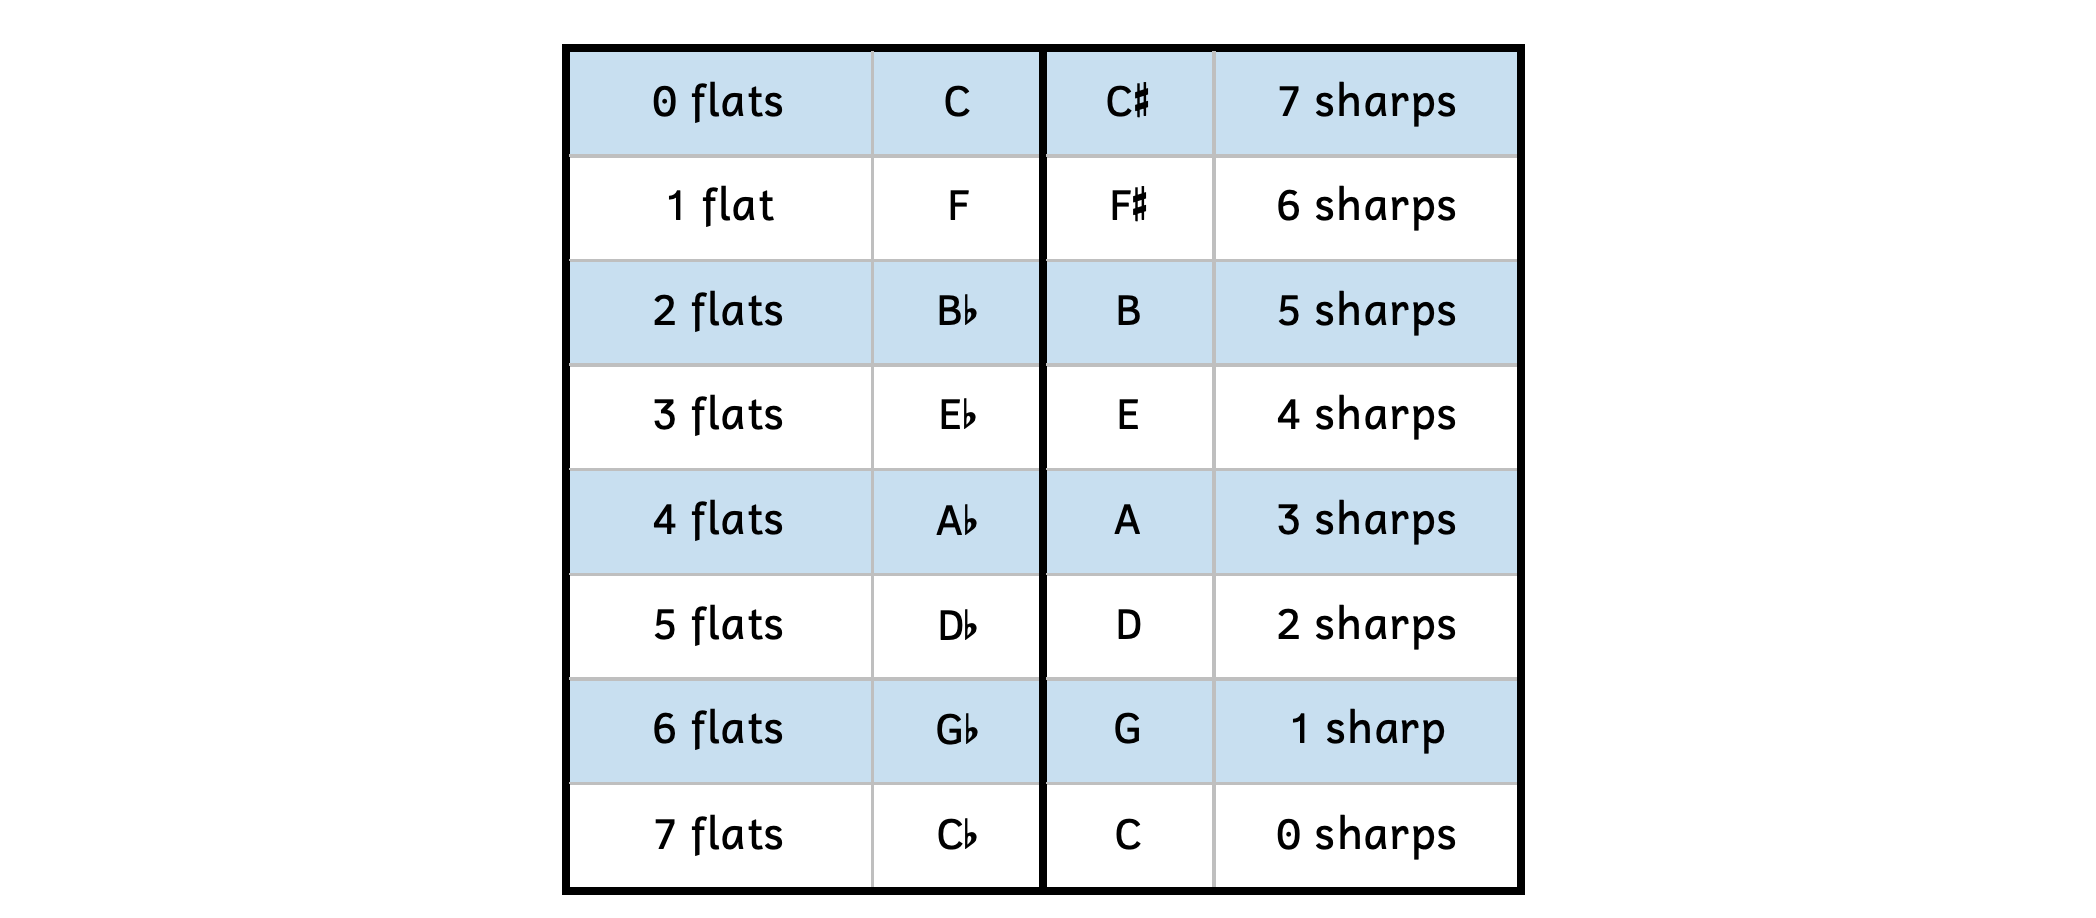 Table comparing major keys with flats and major keys with sharps. C major has zero flats and C-sharp major has 7 sharps. F major has 1 flat and F-sharp major has 6 sharps. B-flat major has 2 flats and B major has 5 sharps. E-flat major has 3 flats and E major has 4 sharps. A-flat major has 4 flats and A major has 3 sharps. D-flat major has 5 flats and D major has 2 sharps. G-flat major has 6 flats and G major has 1 sharp. C-flat major has 7 flats and major has zero sharps.